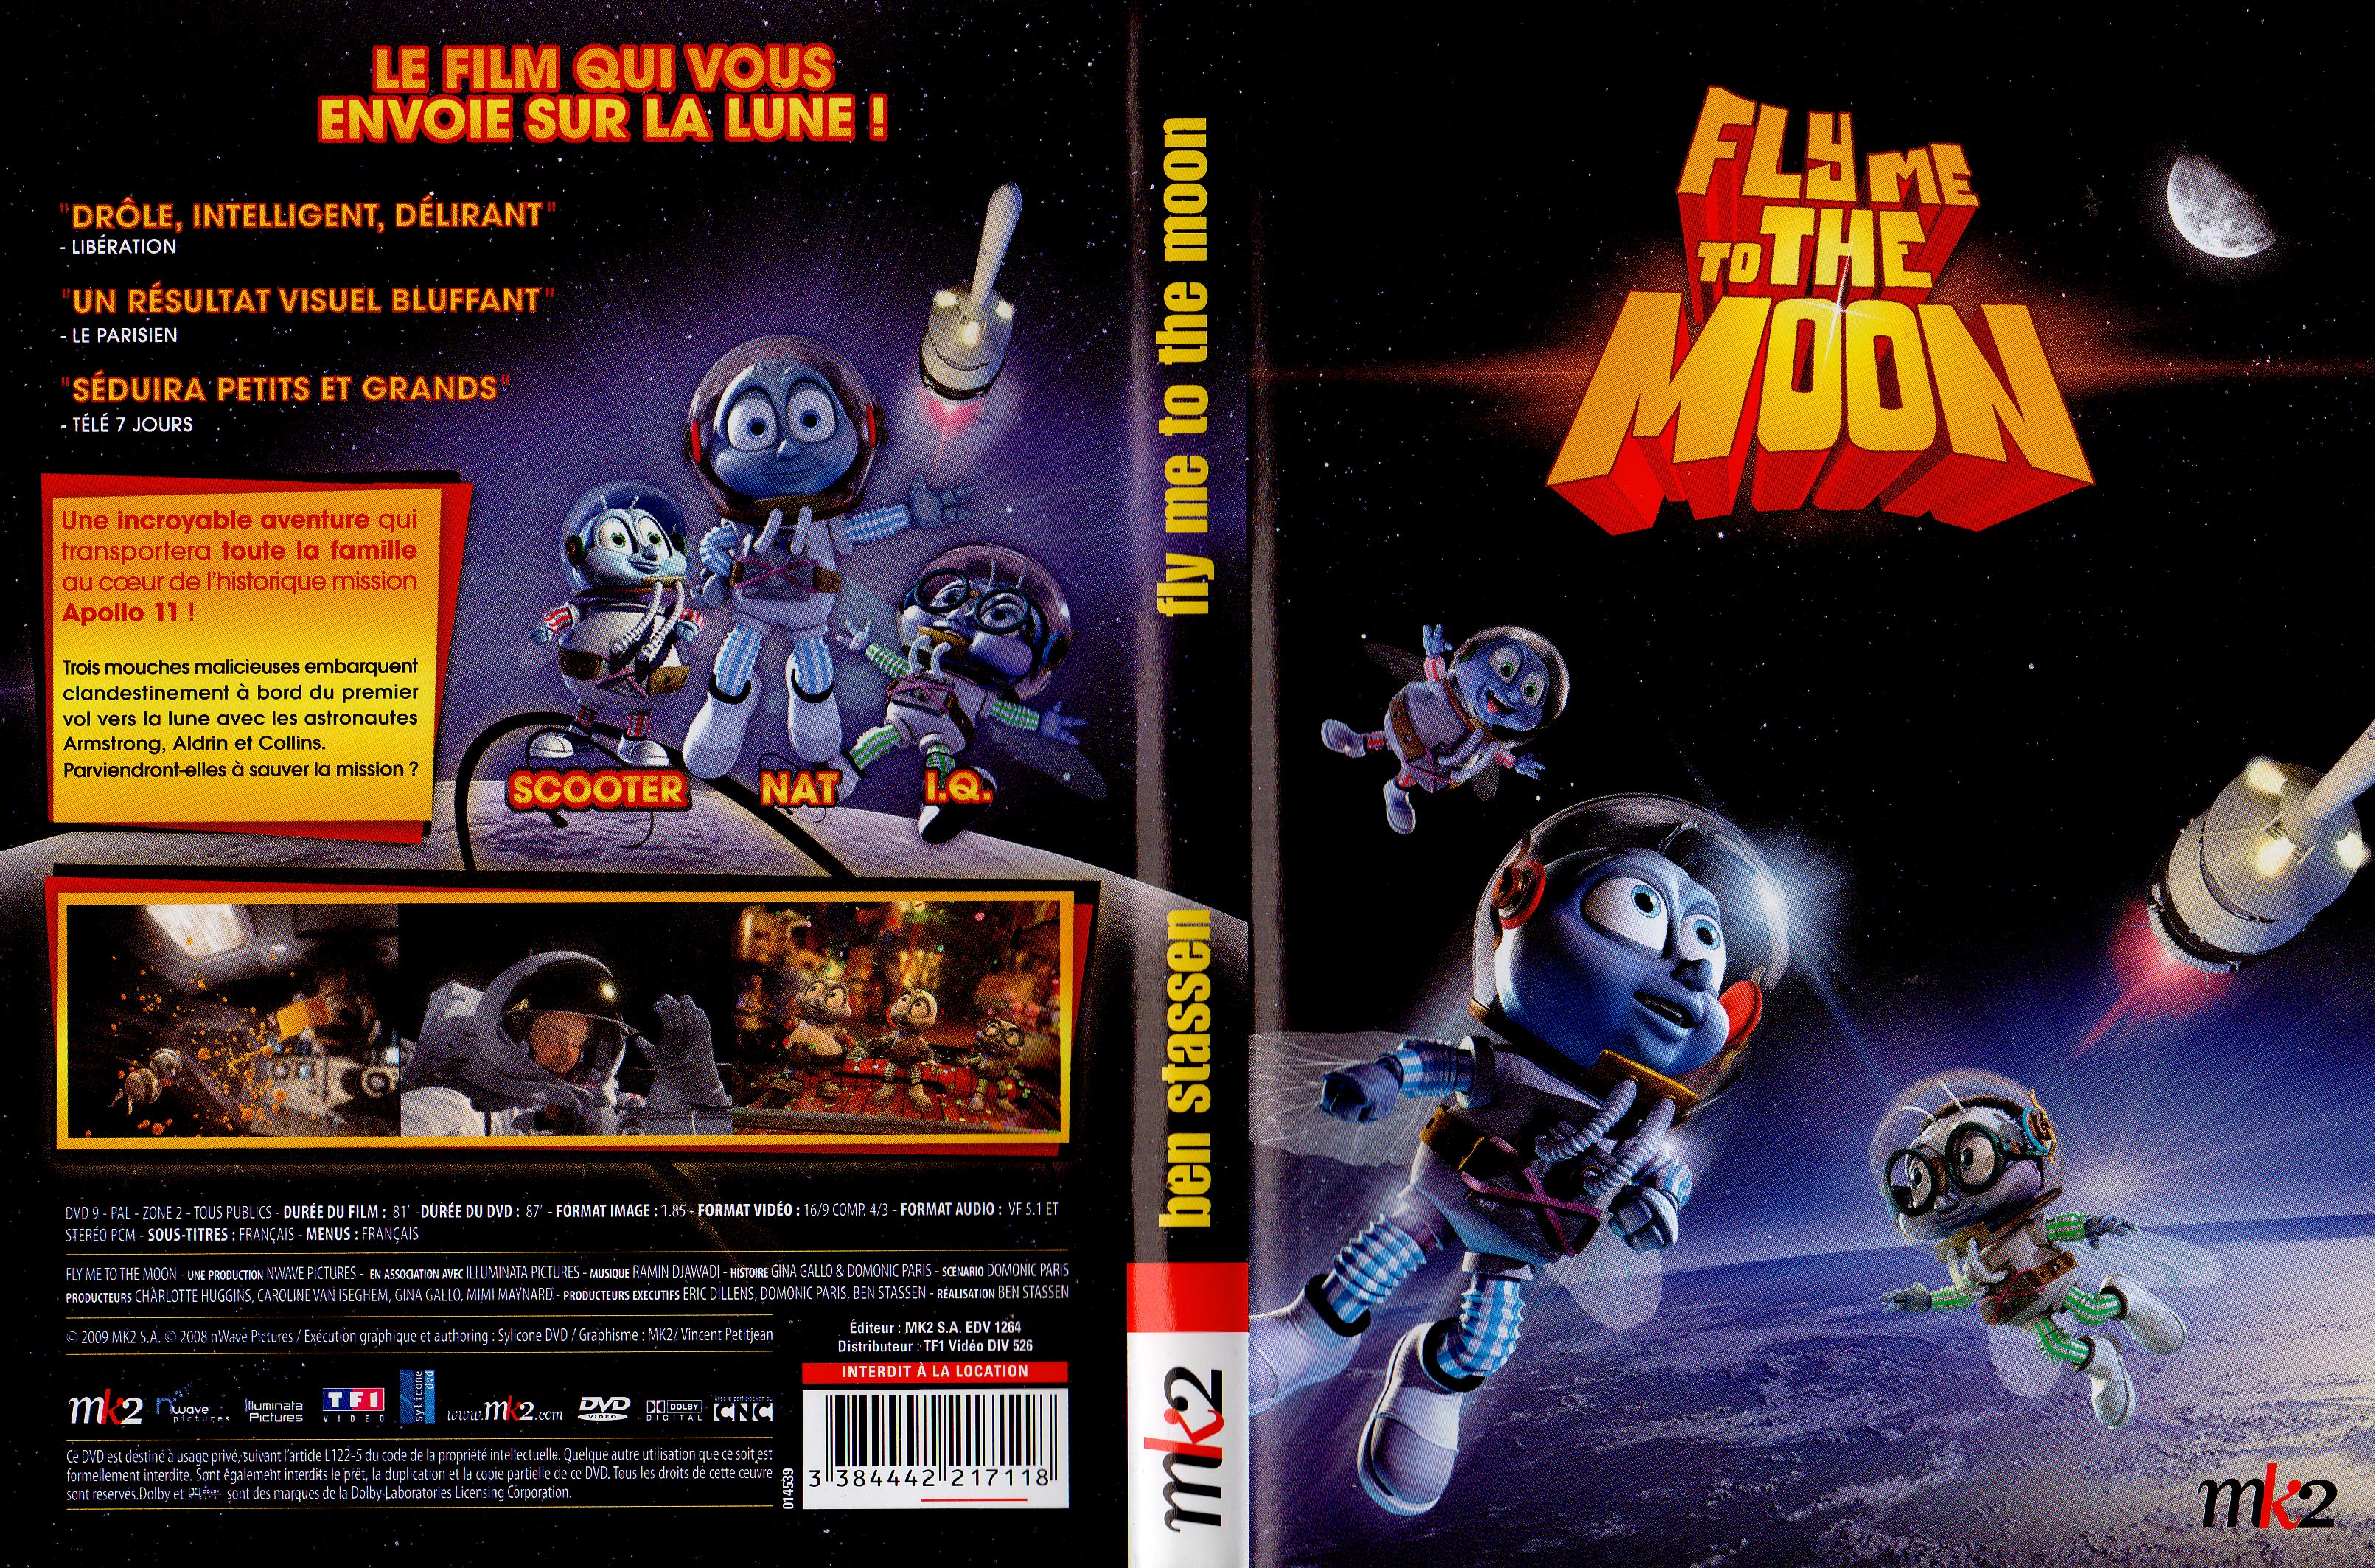 Jaquette DVD Fly me to the moon